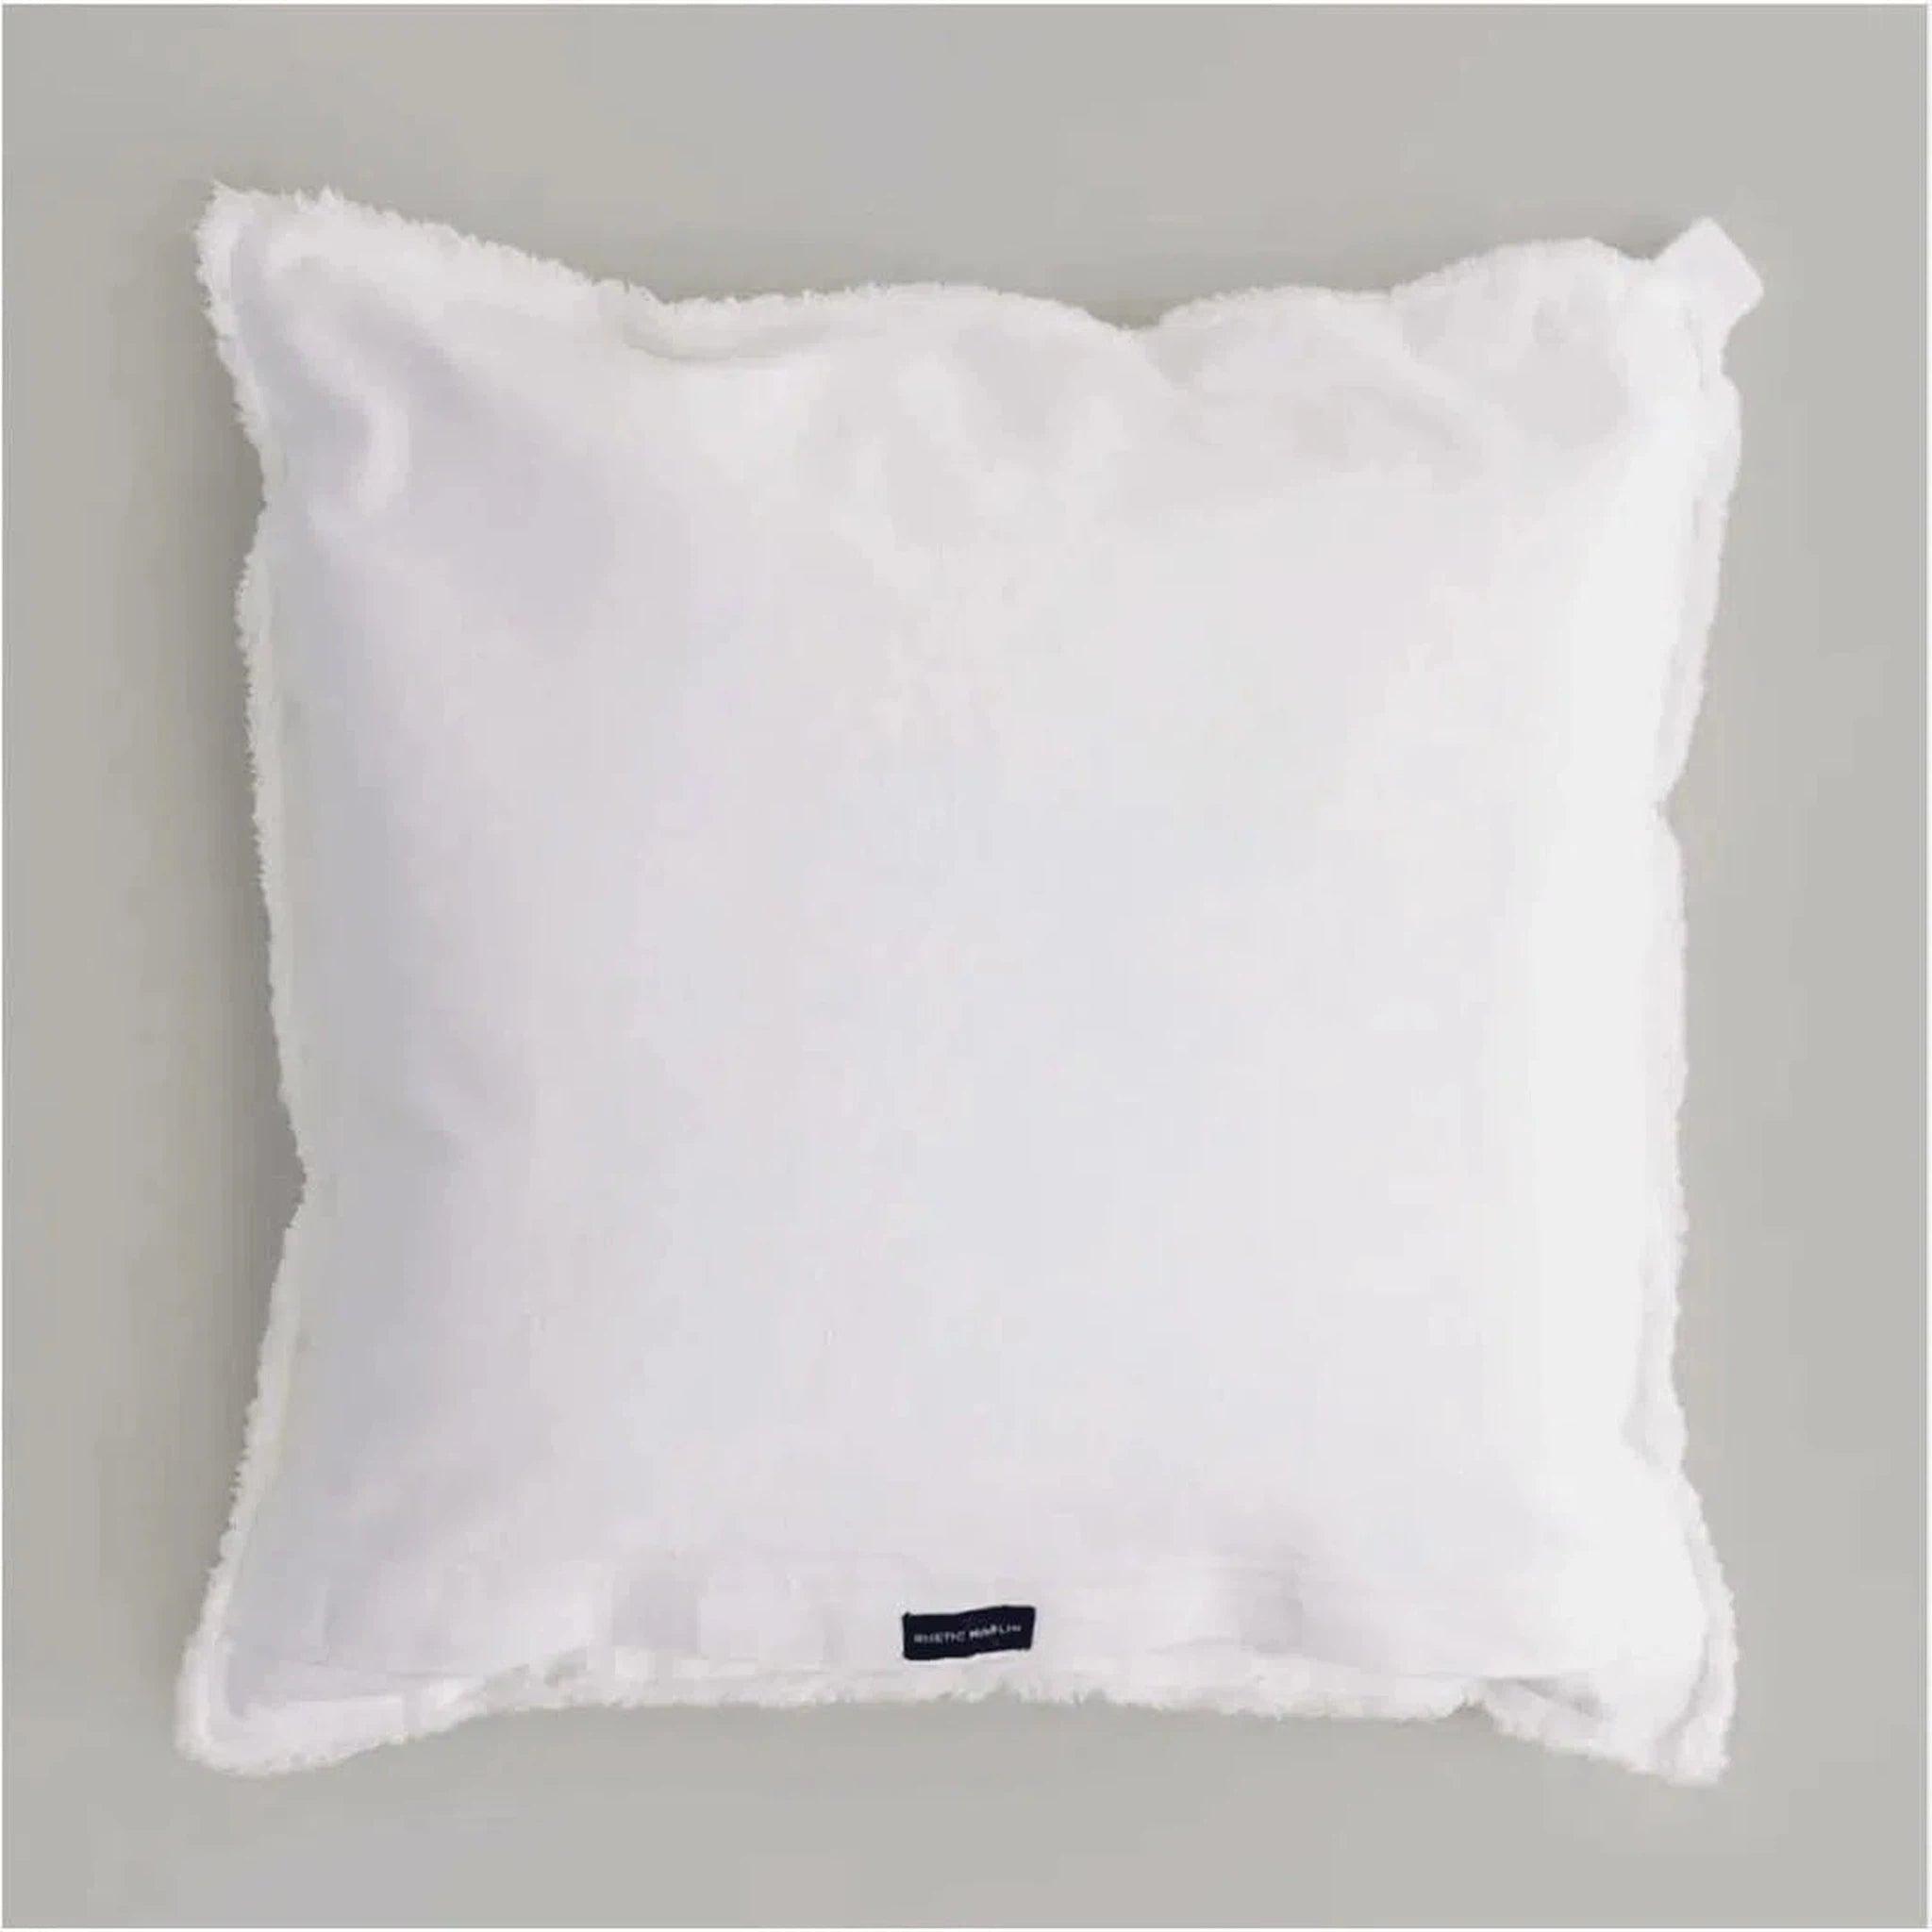 Anchor Square Pillow